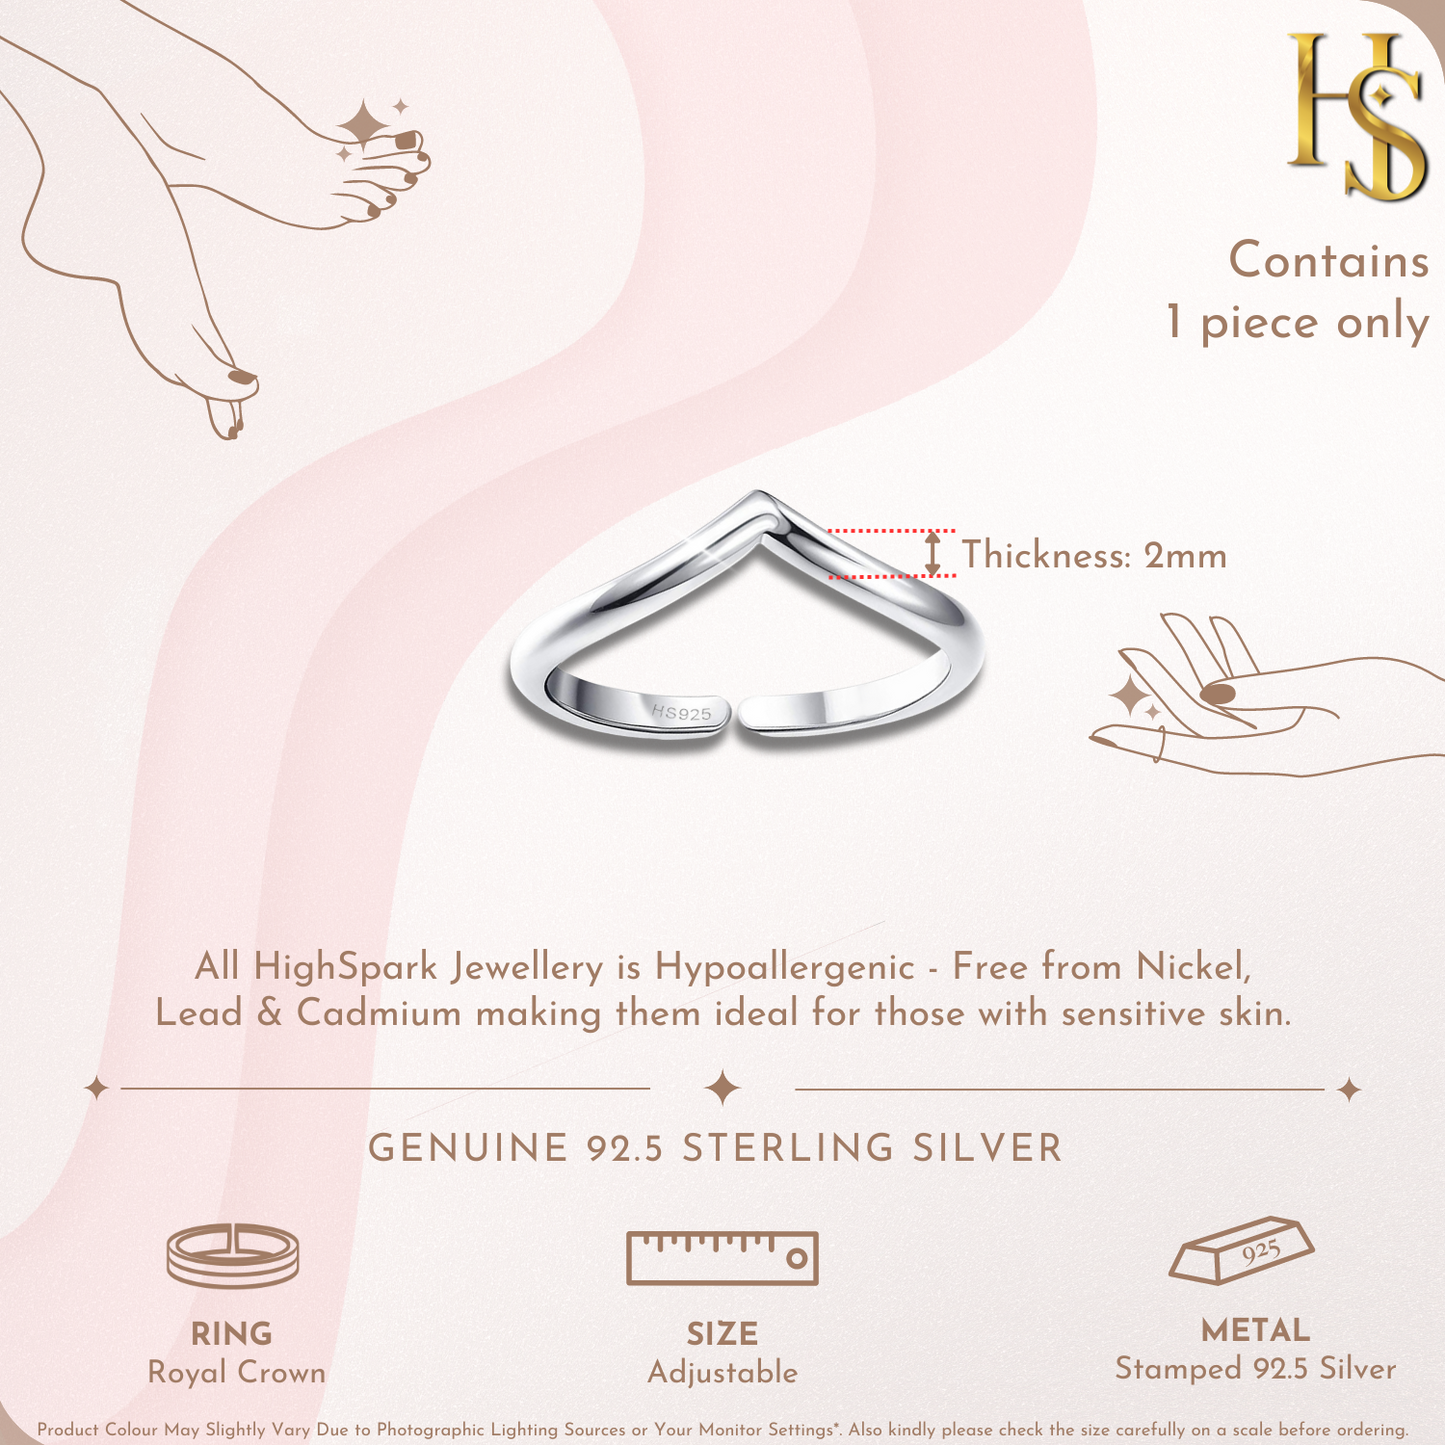 Royal Crown Toe Ring - Band Ring - 925 Sterling Silver - 1 Piece